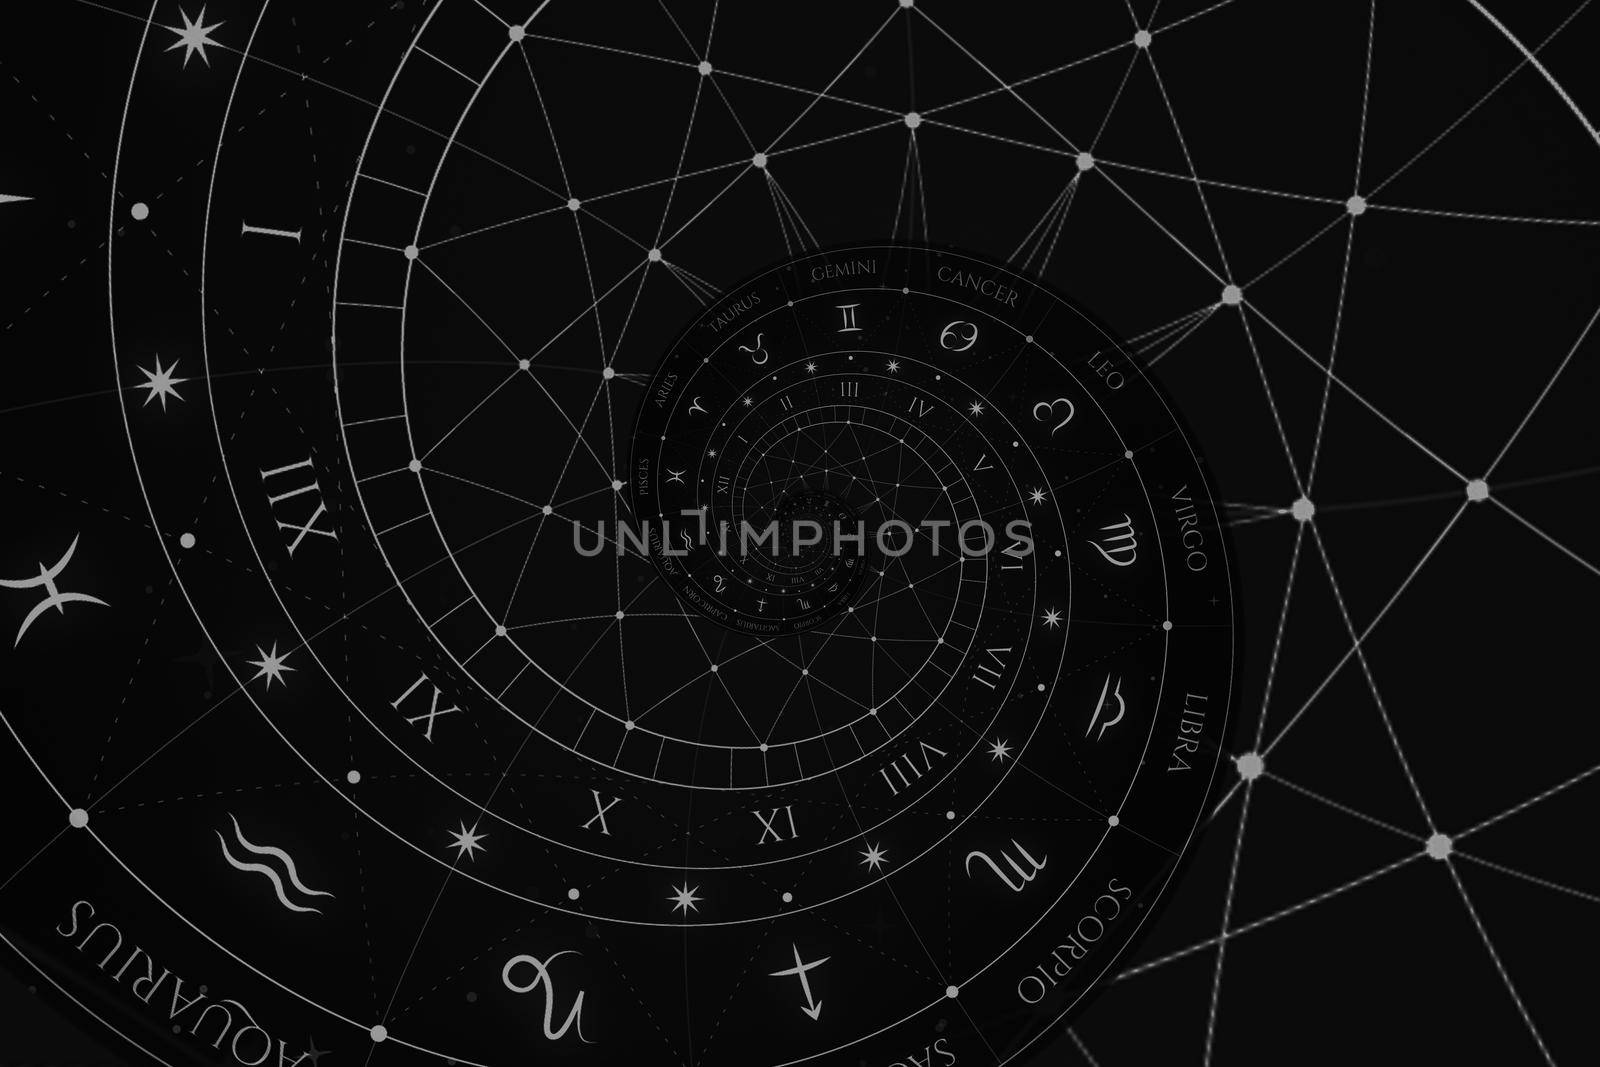 Abstract old conceptual background on mysticism, astrology, fantasy - black